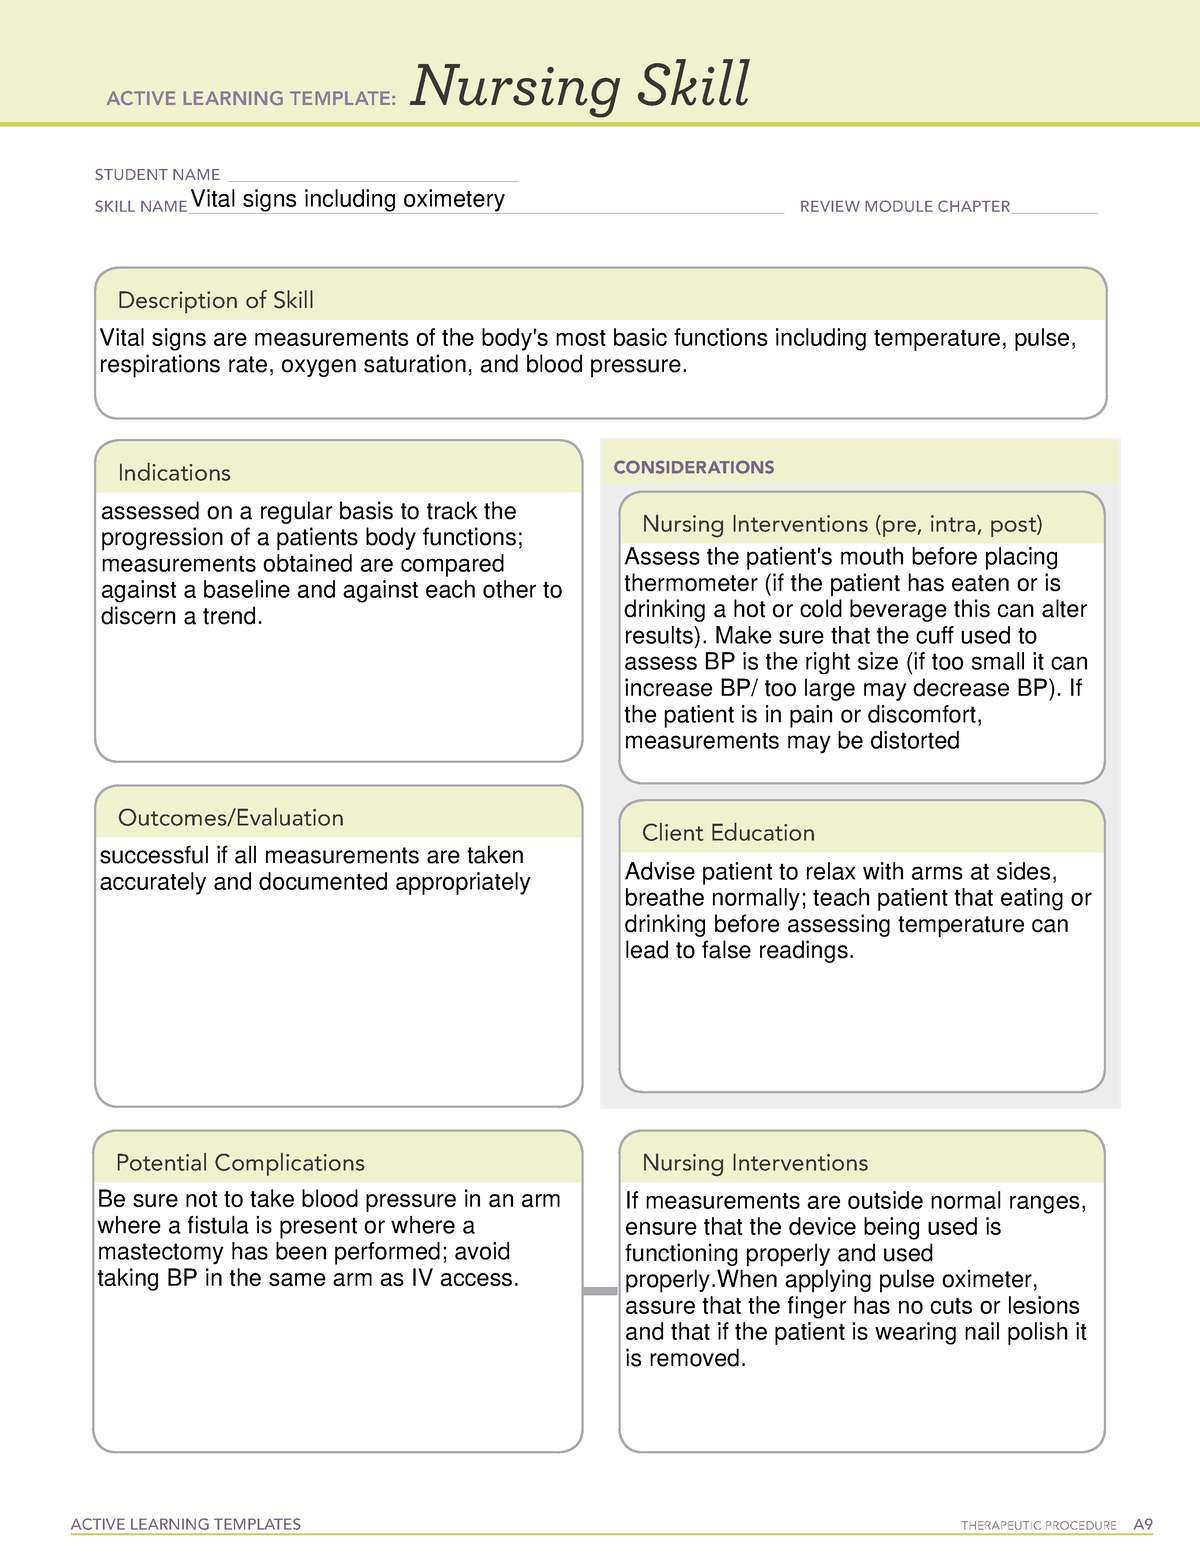 vital-signs-ati-template-active-learning-templates-therapeutic